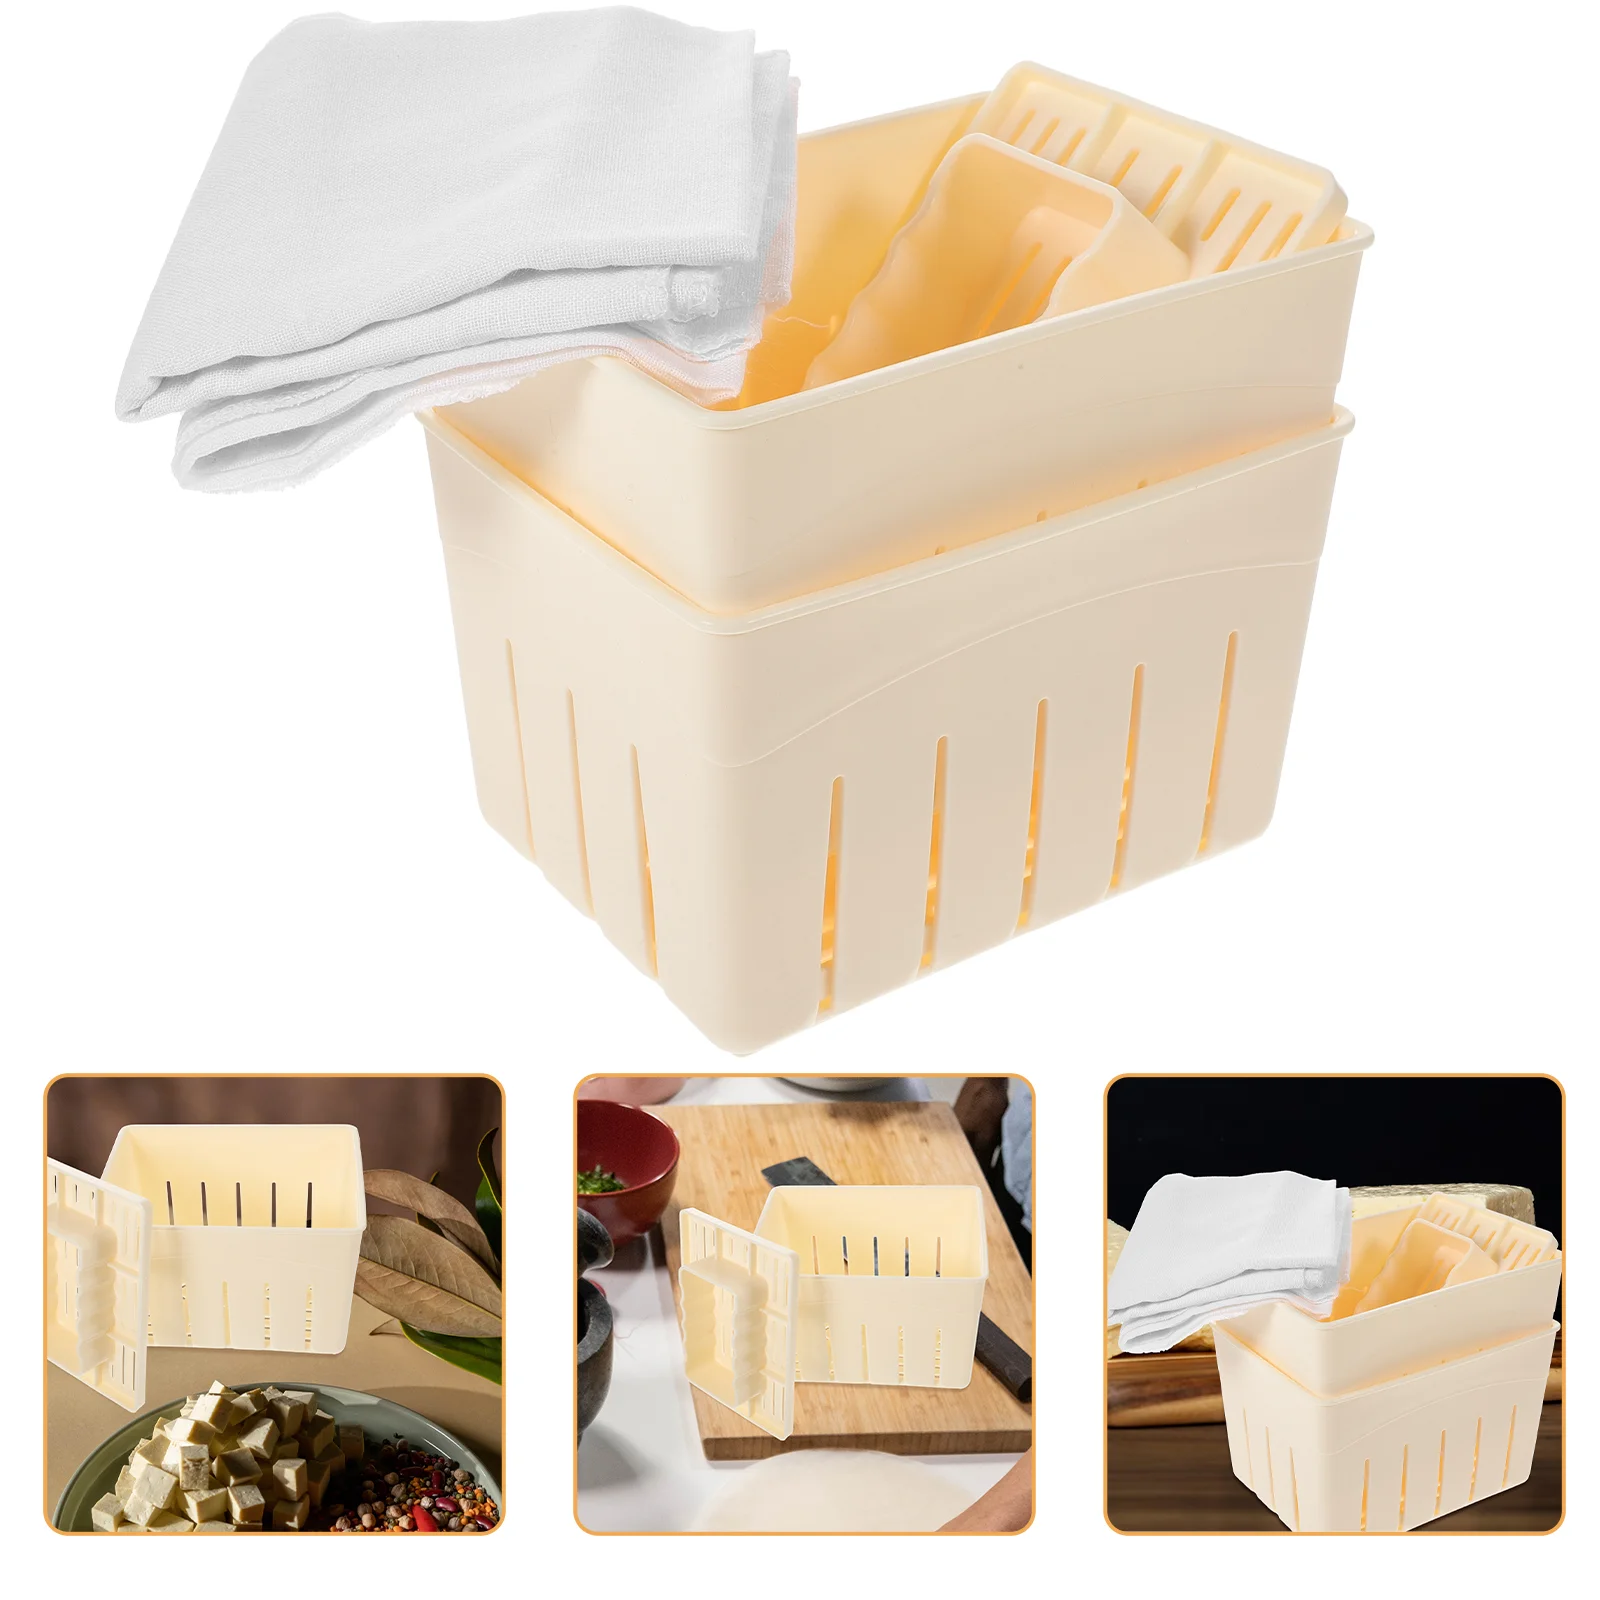 

2 Sets Homemade Tofu Stamper String Cheese Organic Plastic Moulds Molds Bean Curd Makers Convenient Pressing Cotton